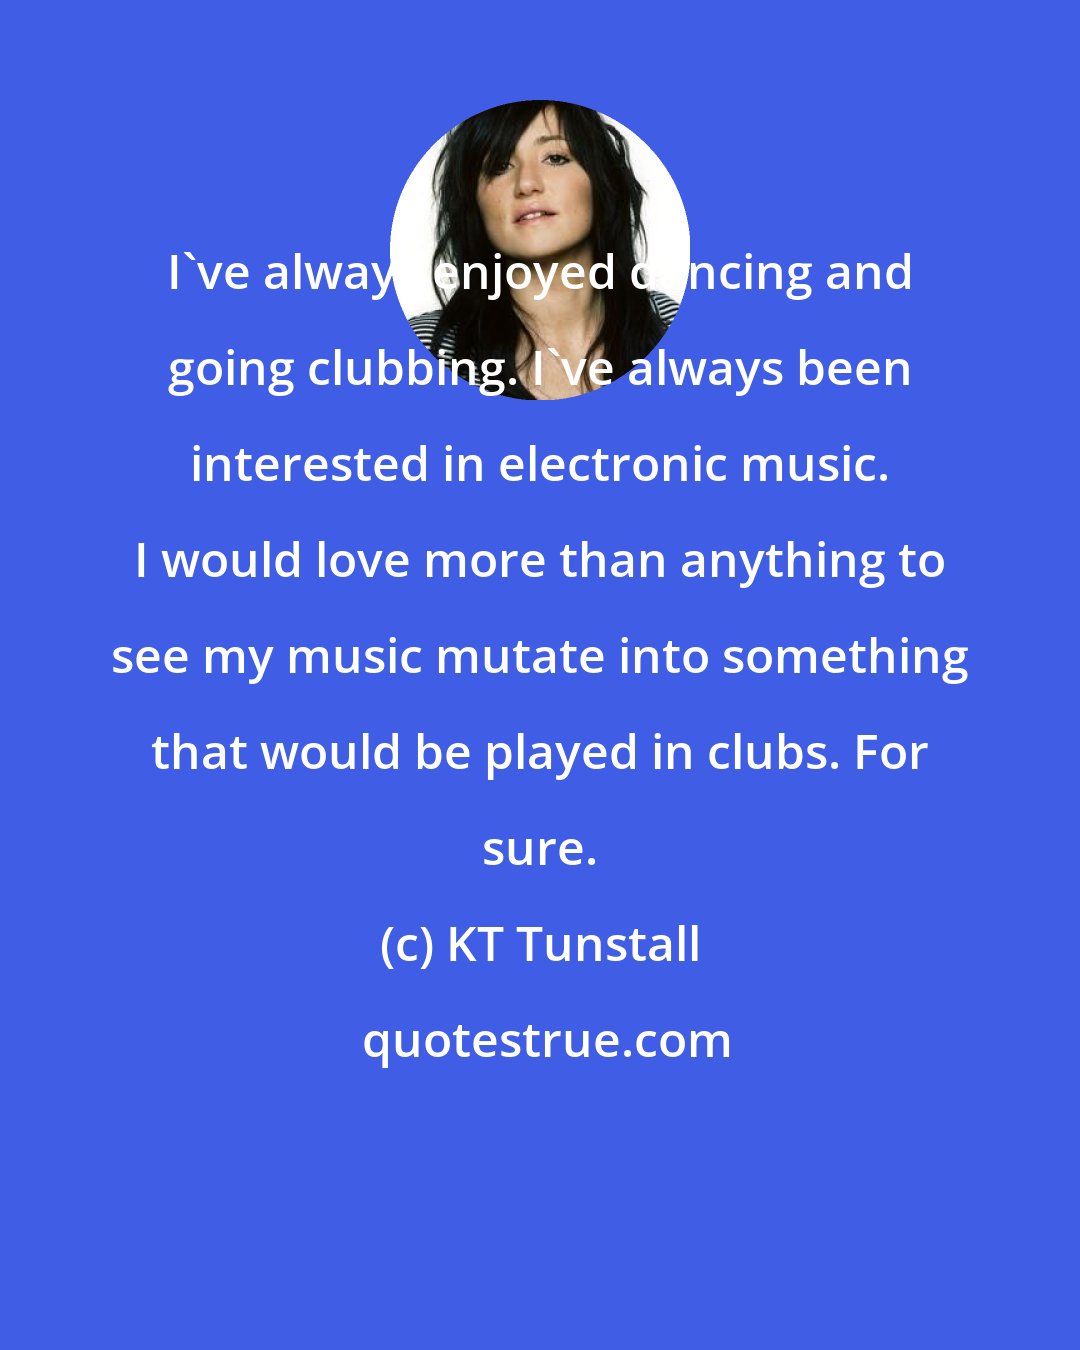 KT Tunstall: I've always enjoyed dancing and going clubbing. I've always been interested in electronic music. I would love more than anything to see my music mutate into something that would be played in clubs. For sure.